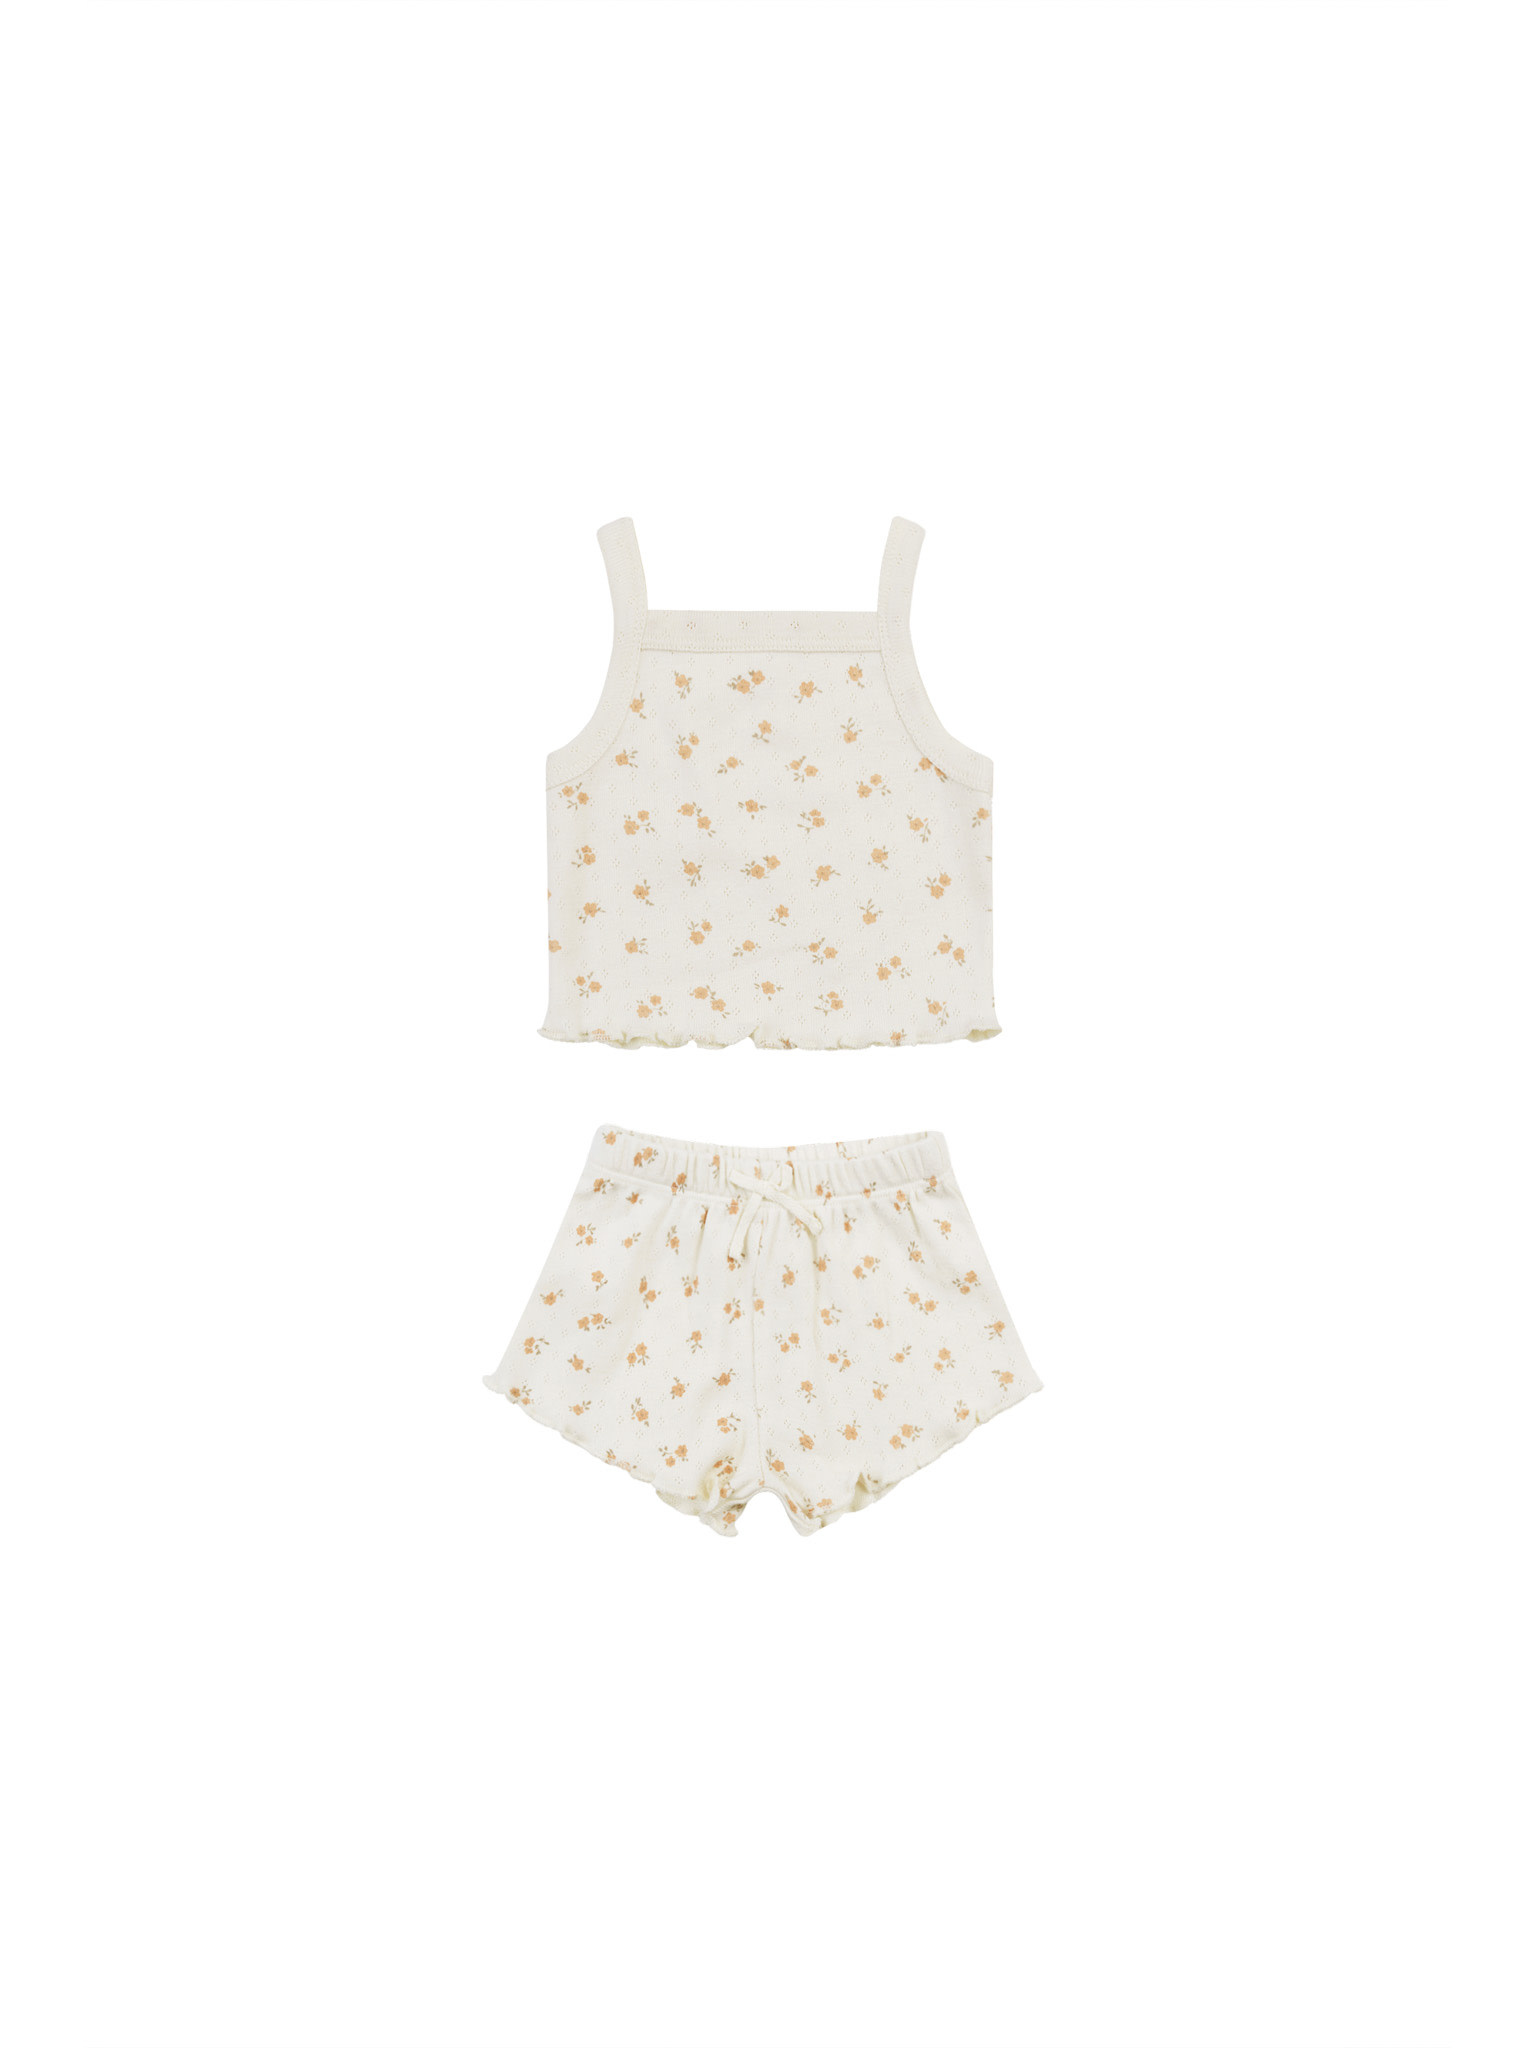 Quincy Mae Quincy Mae Pointelle Tank + Shortie Set